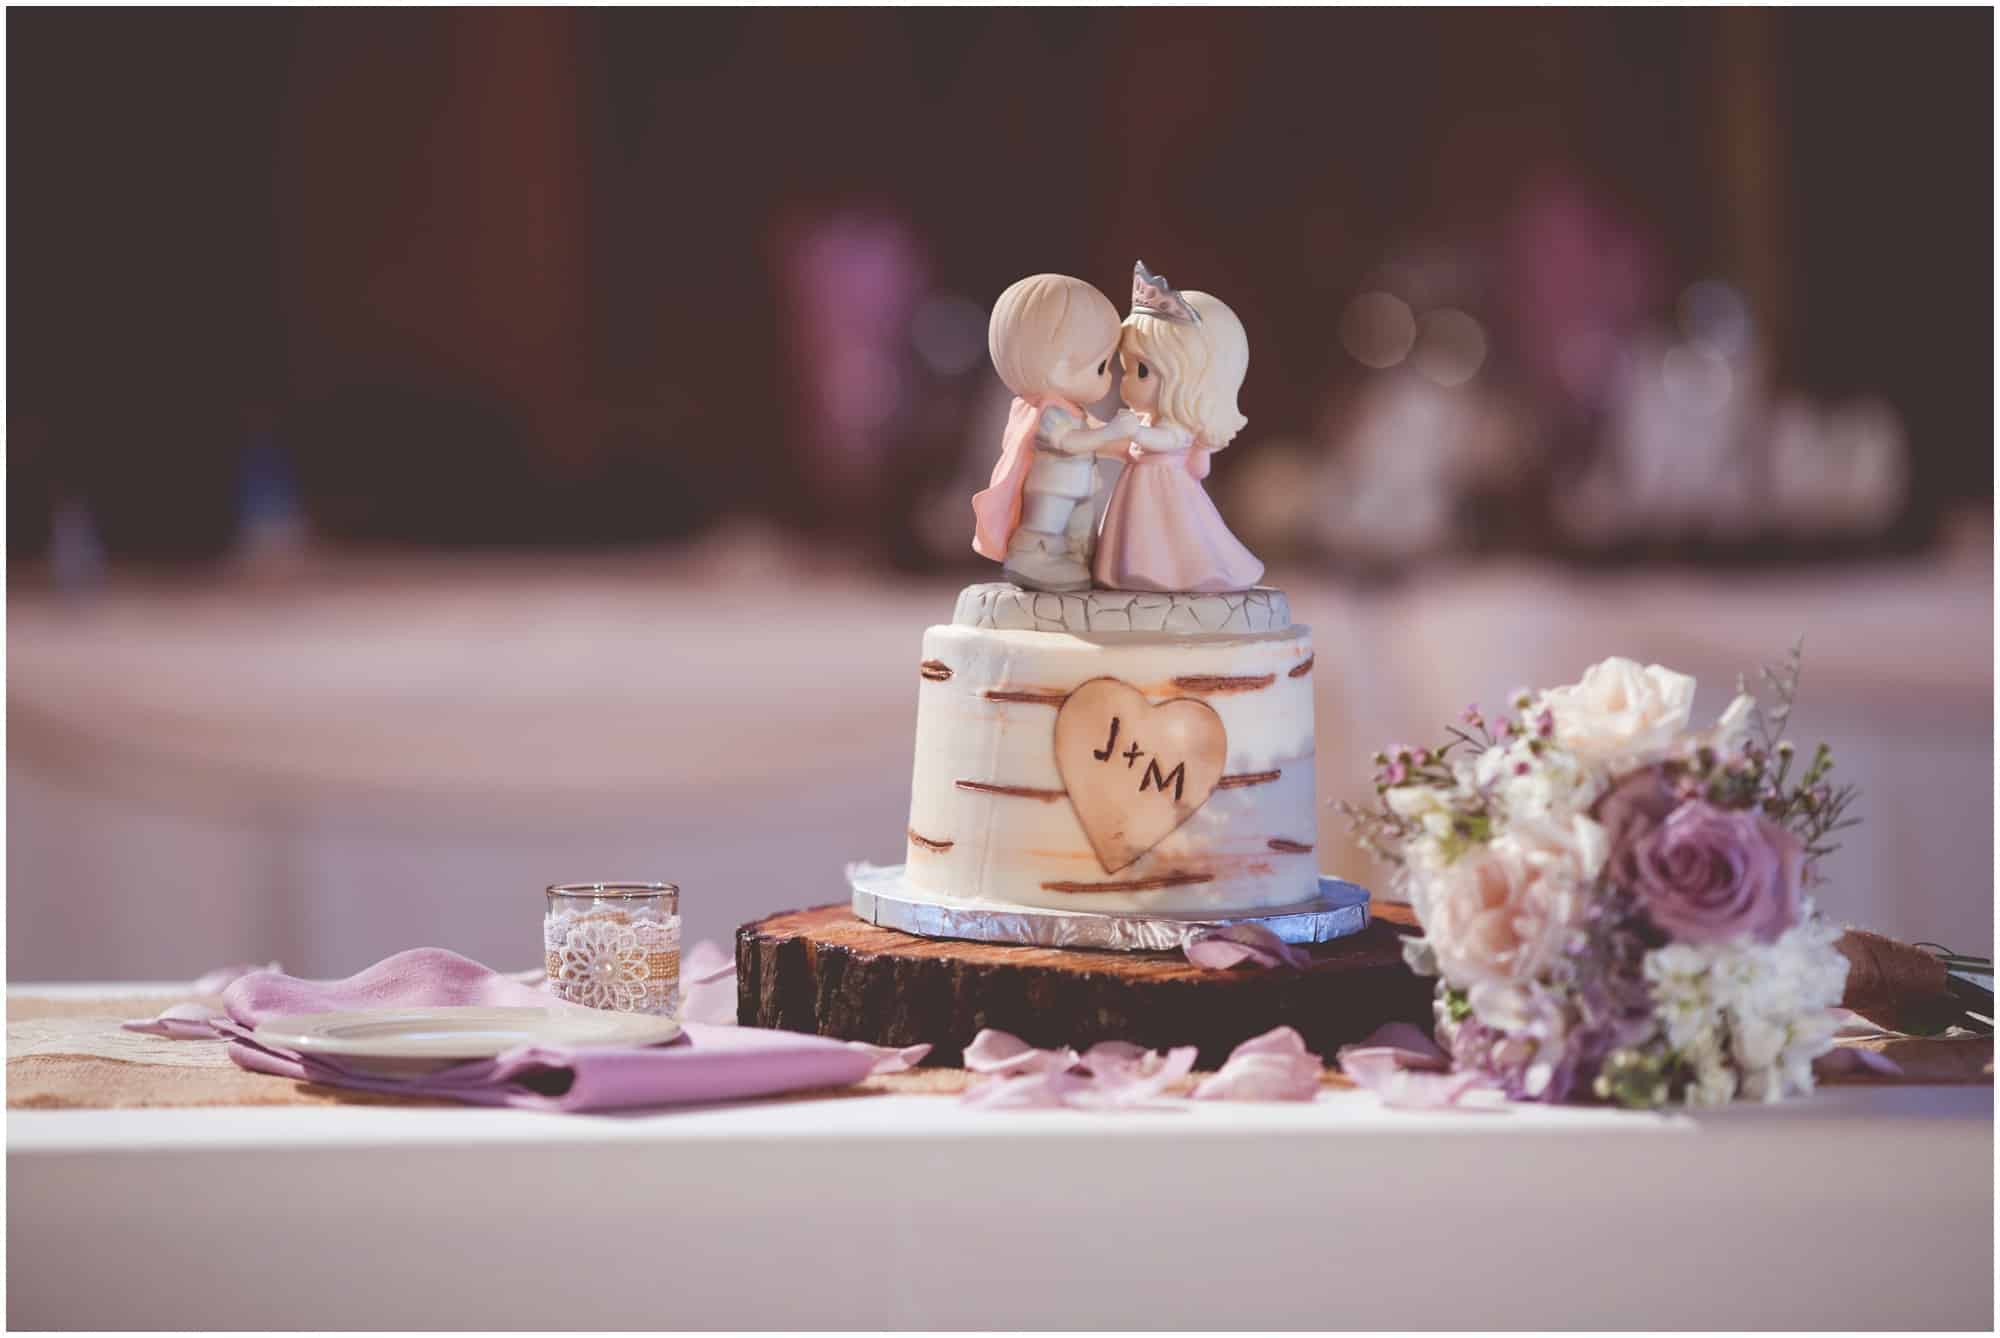 County Line Orchard Wedding Photographer special bride and groom cake with a precious moments disney cake topper